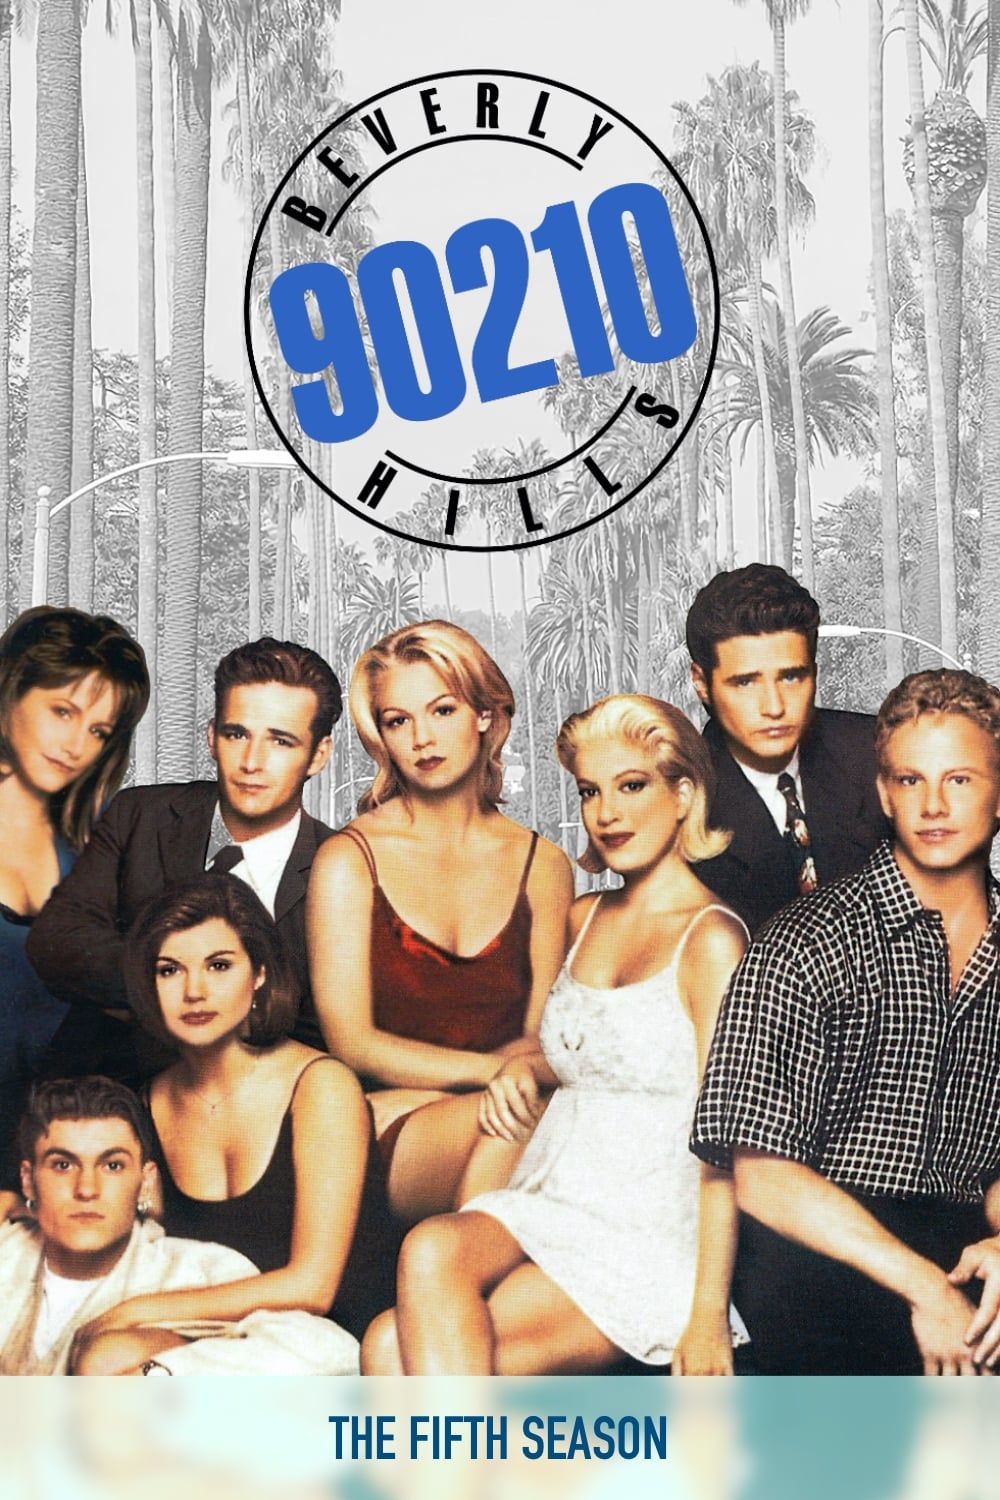 Beverly Hills 90210 Show / You Gotta Have Heart